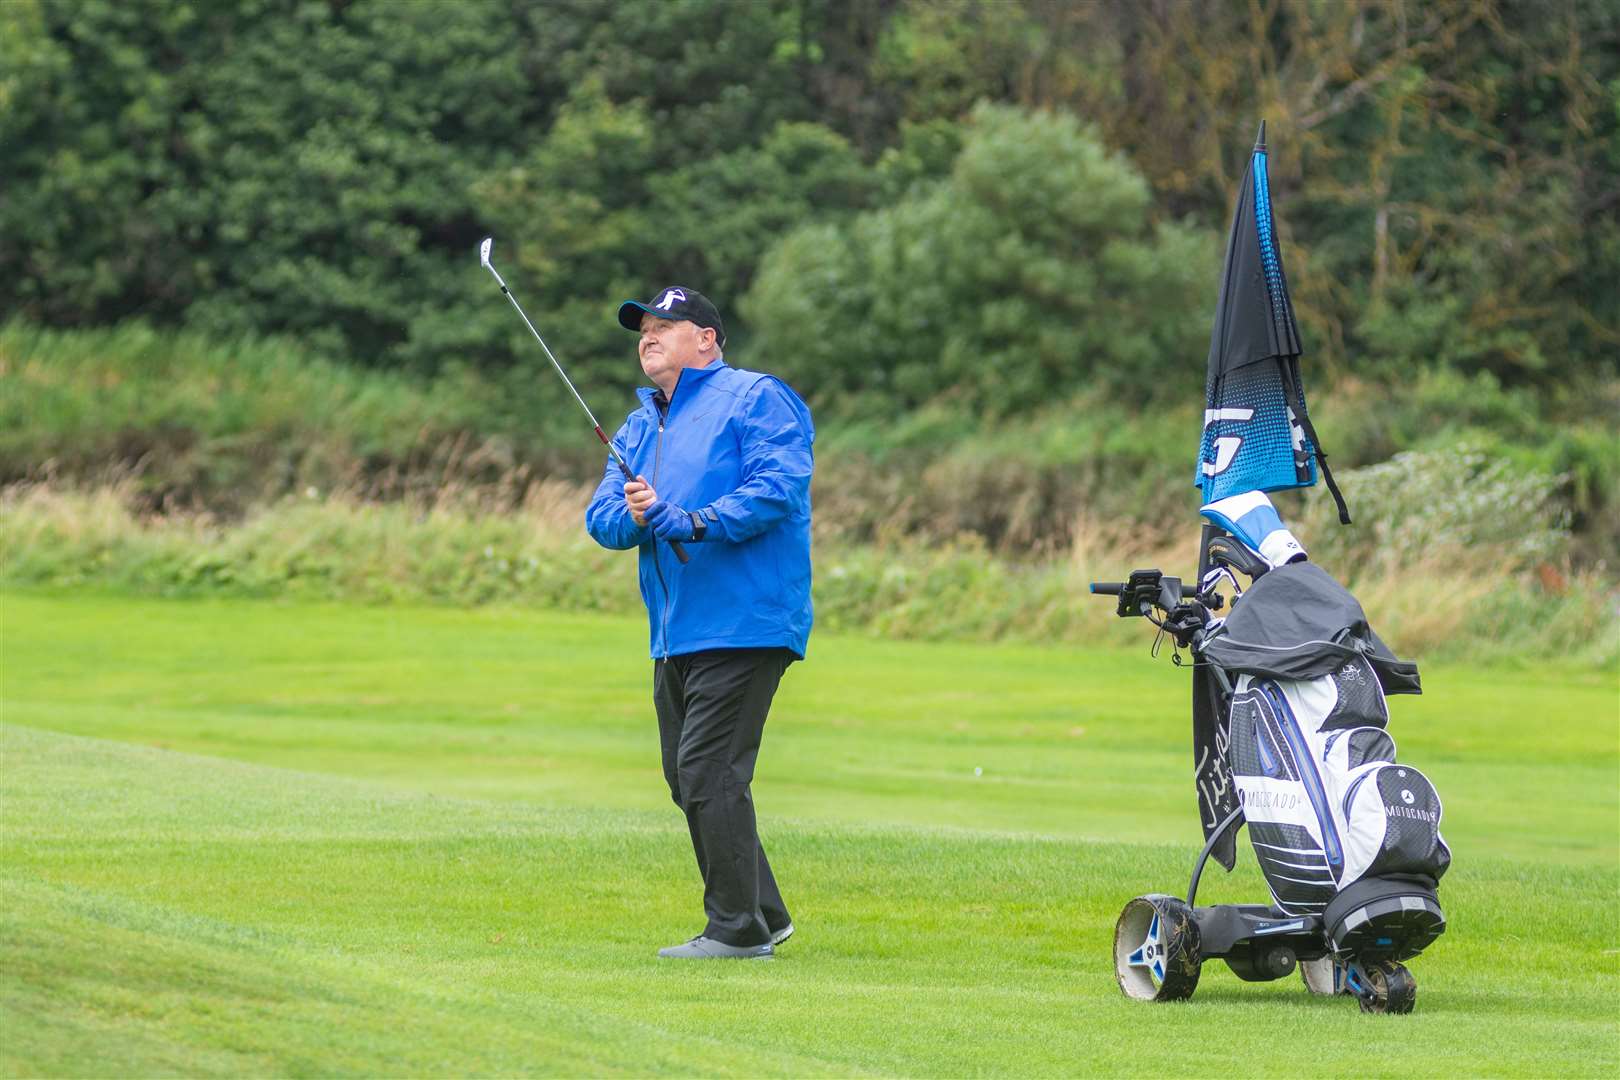 Ian Mutch won his opening matchplay contest at Duff House Royal. Picture: Daniel Forsyth.